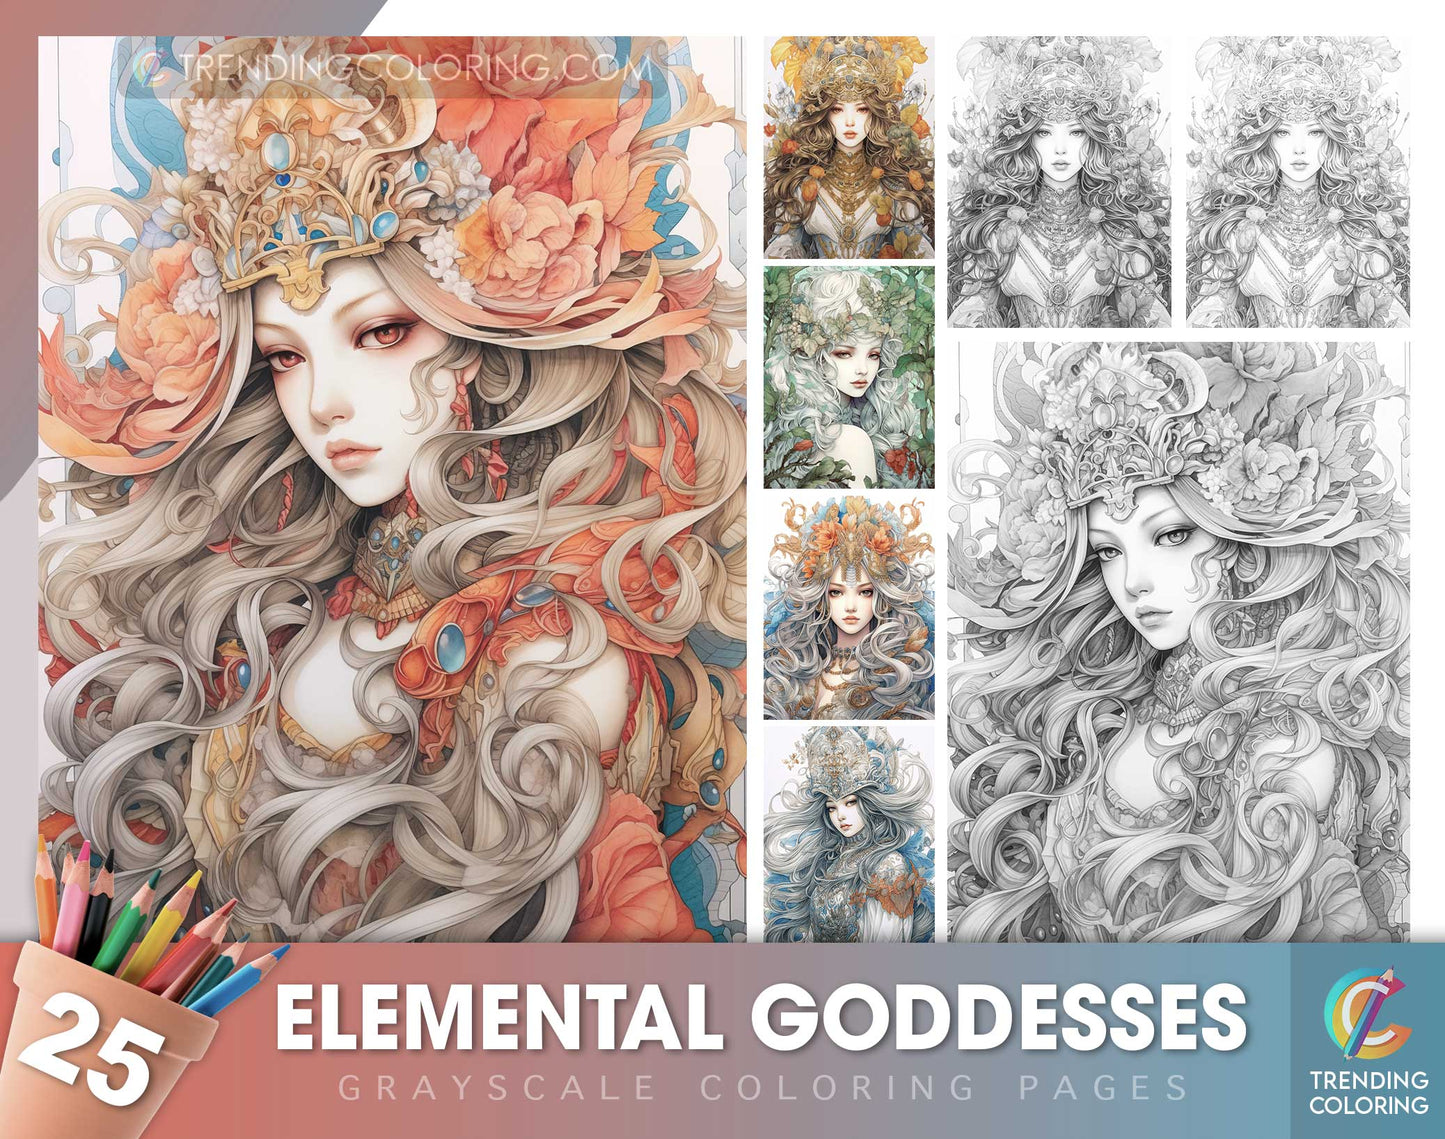 25 Elemental Goddesses Grayscale Coloring Pages - Instant Download - Printable Dark/Light